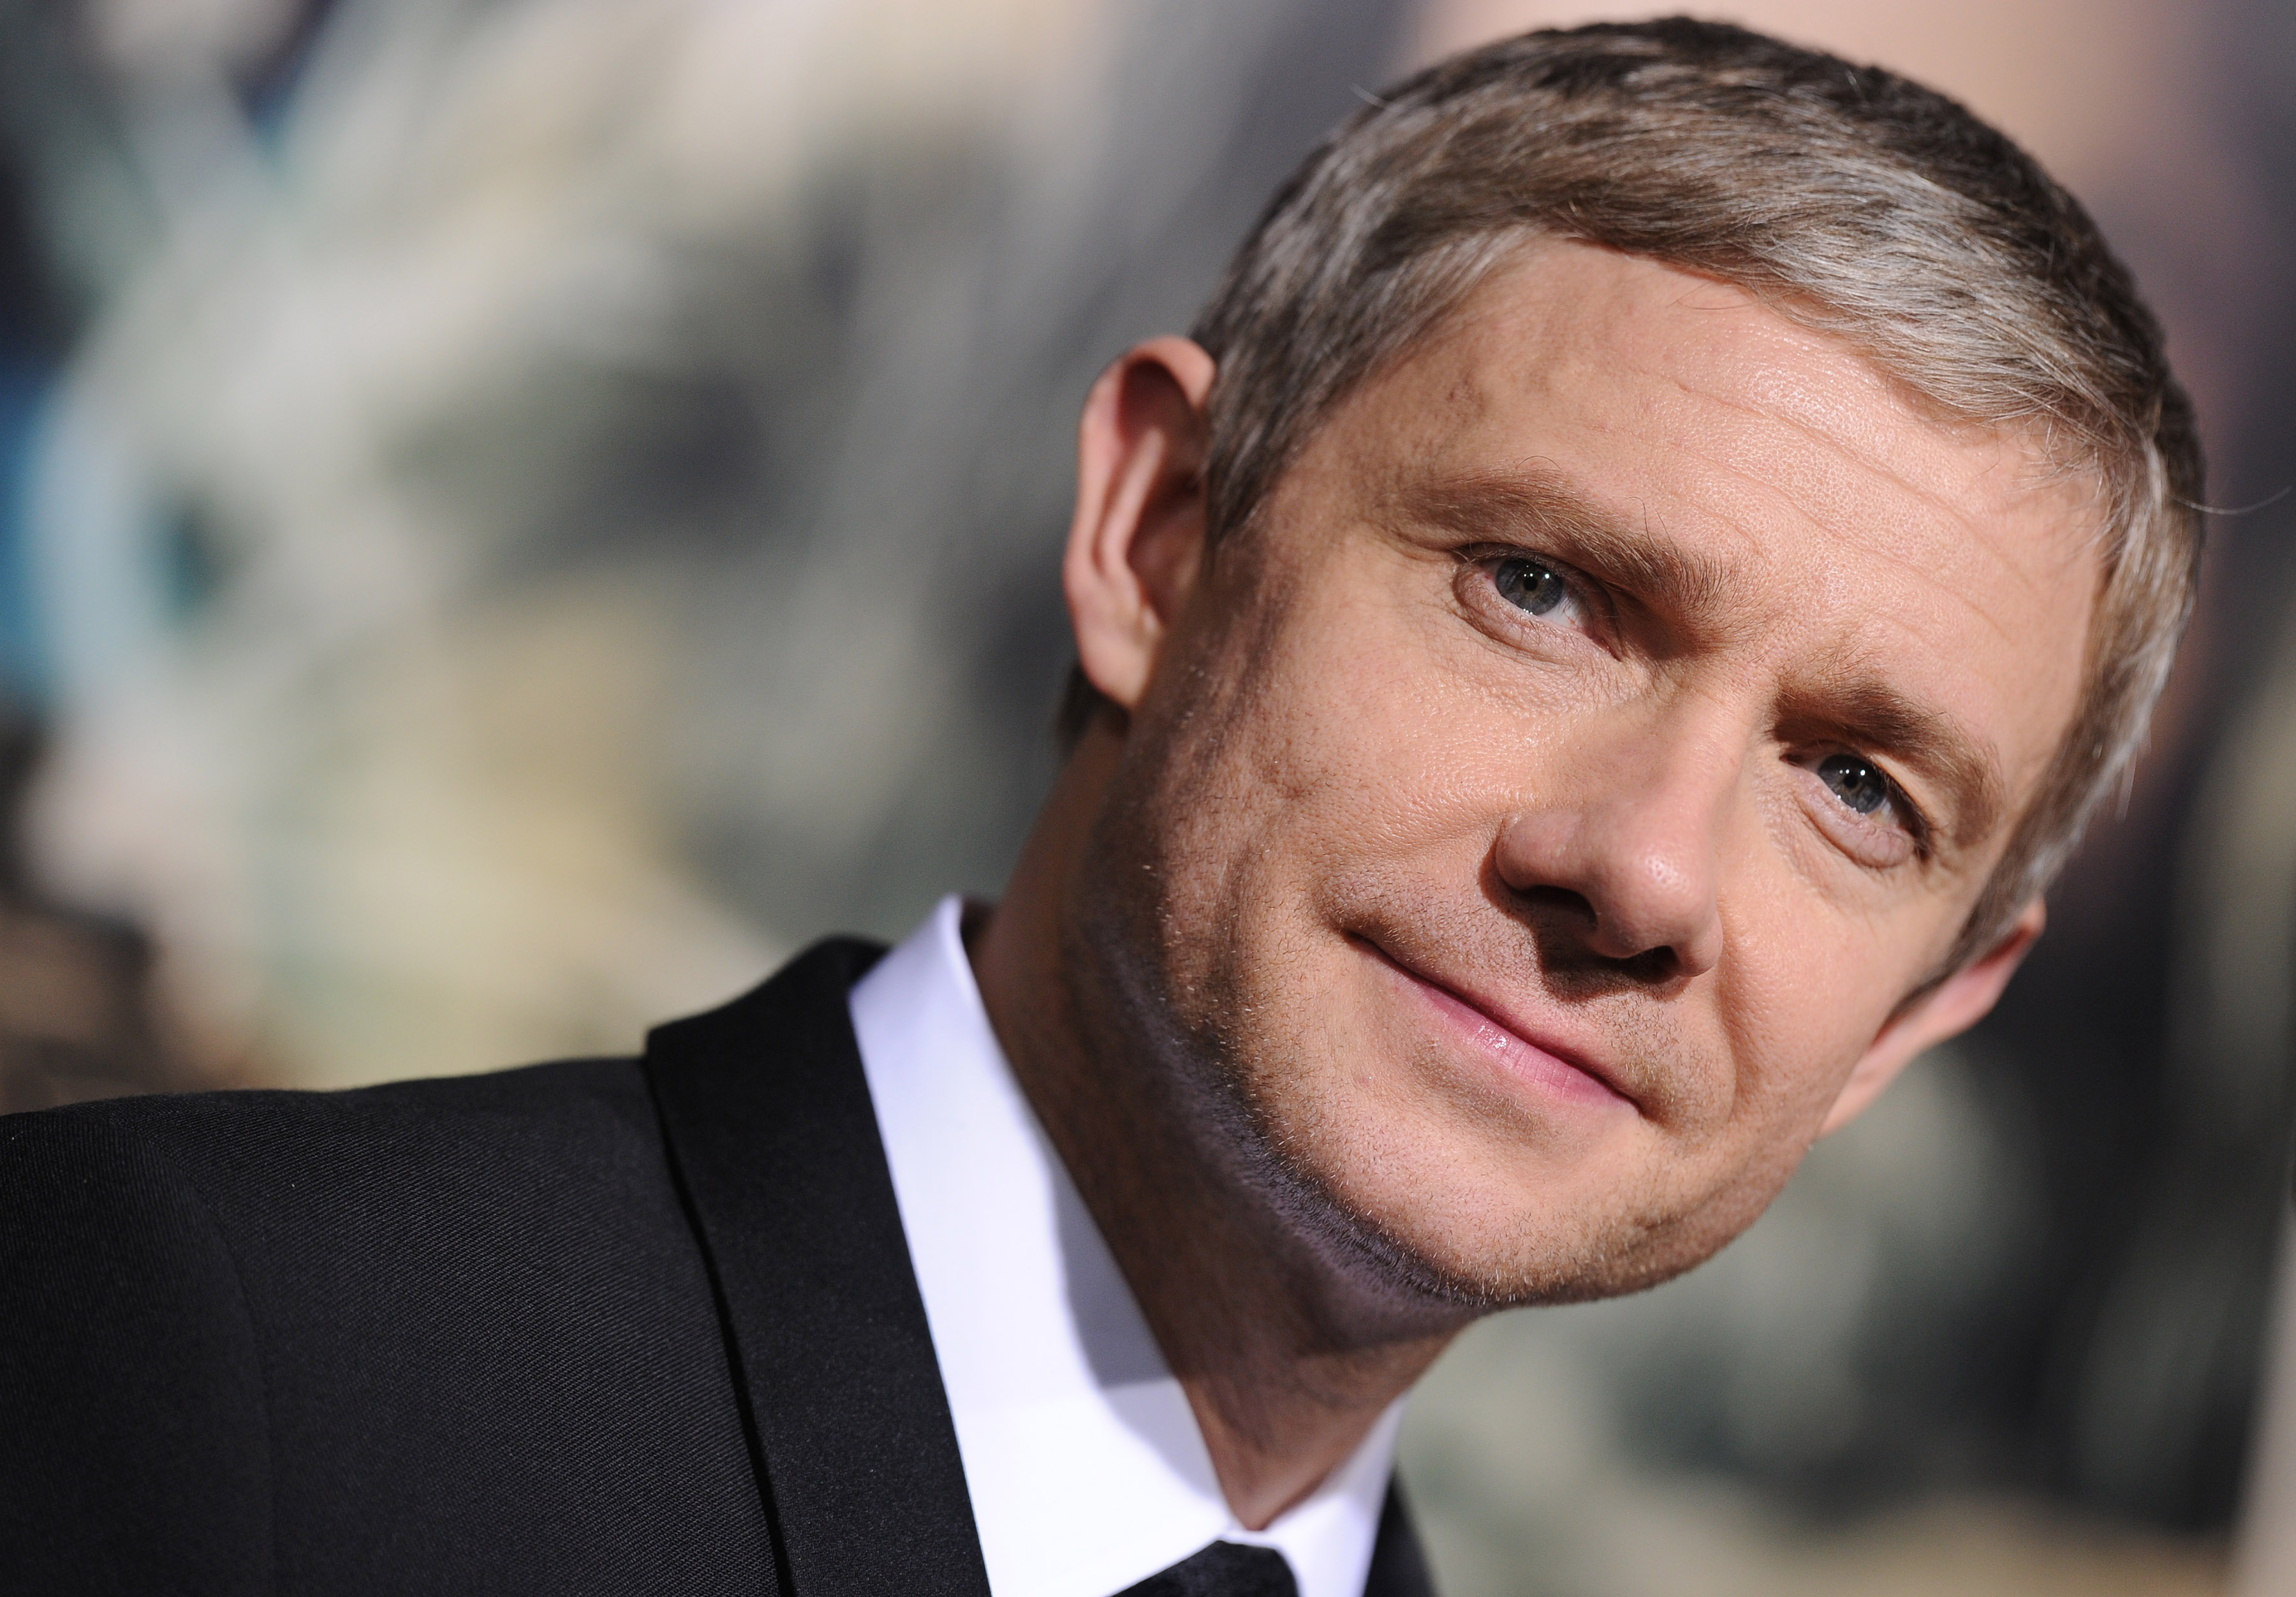 Martin Freeman at the Los Angeles Premiere of "The Hobbit: The Desolation of Smaug".
                      TCL Chinese Theatre, Hollywood, CA. (Axelle/Bauer-Griffin -- FilmMagic)